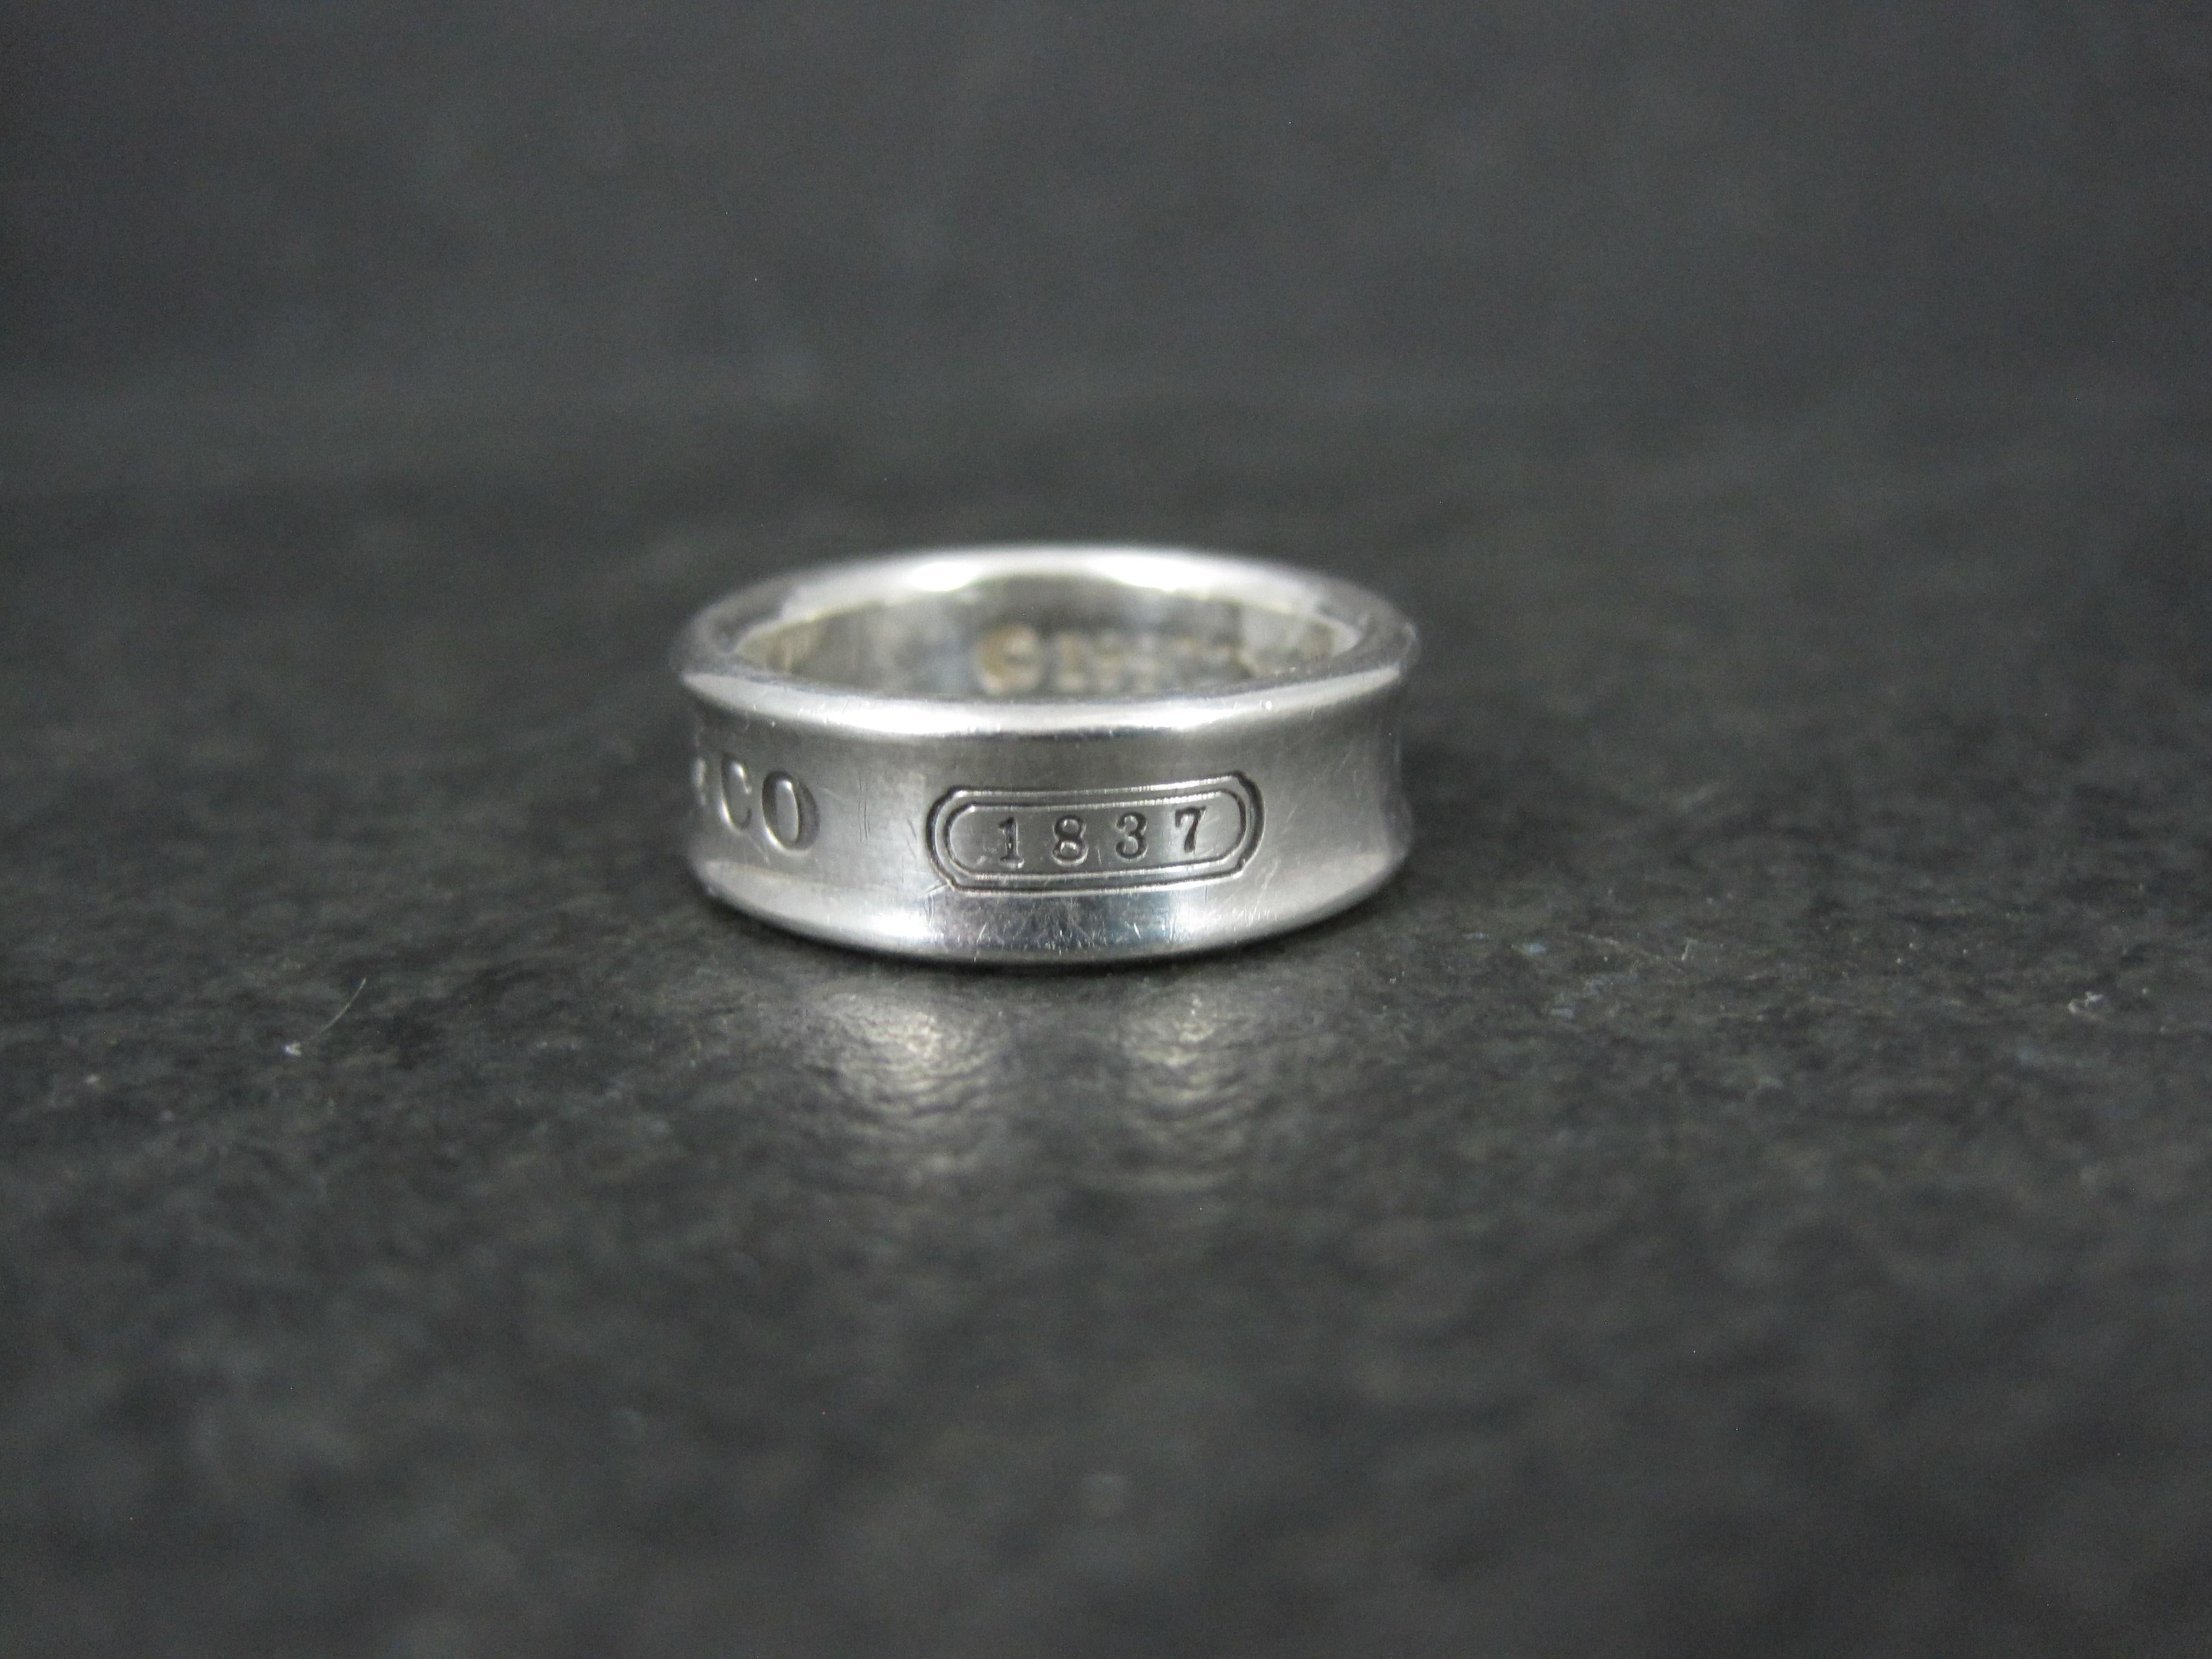 1997 Tiffany & Co 1837 Band Ring Sterling Silver Size 6.5 For Sale 1